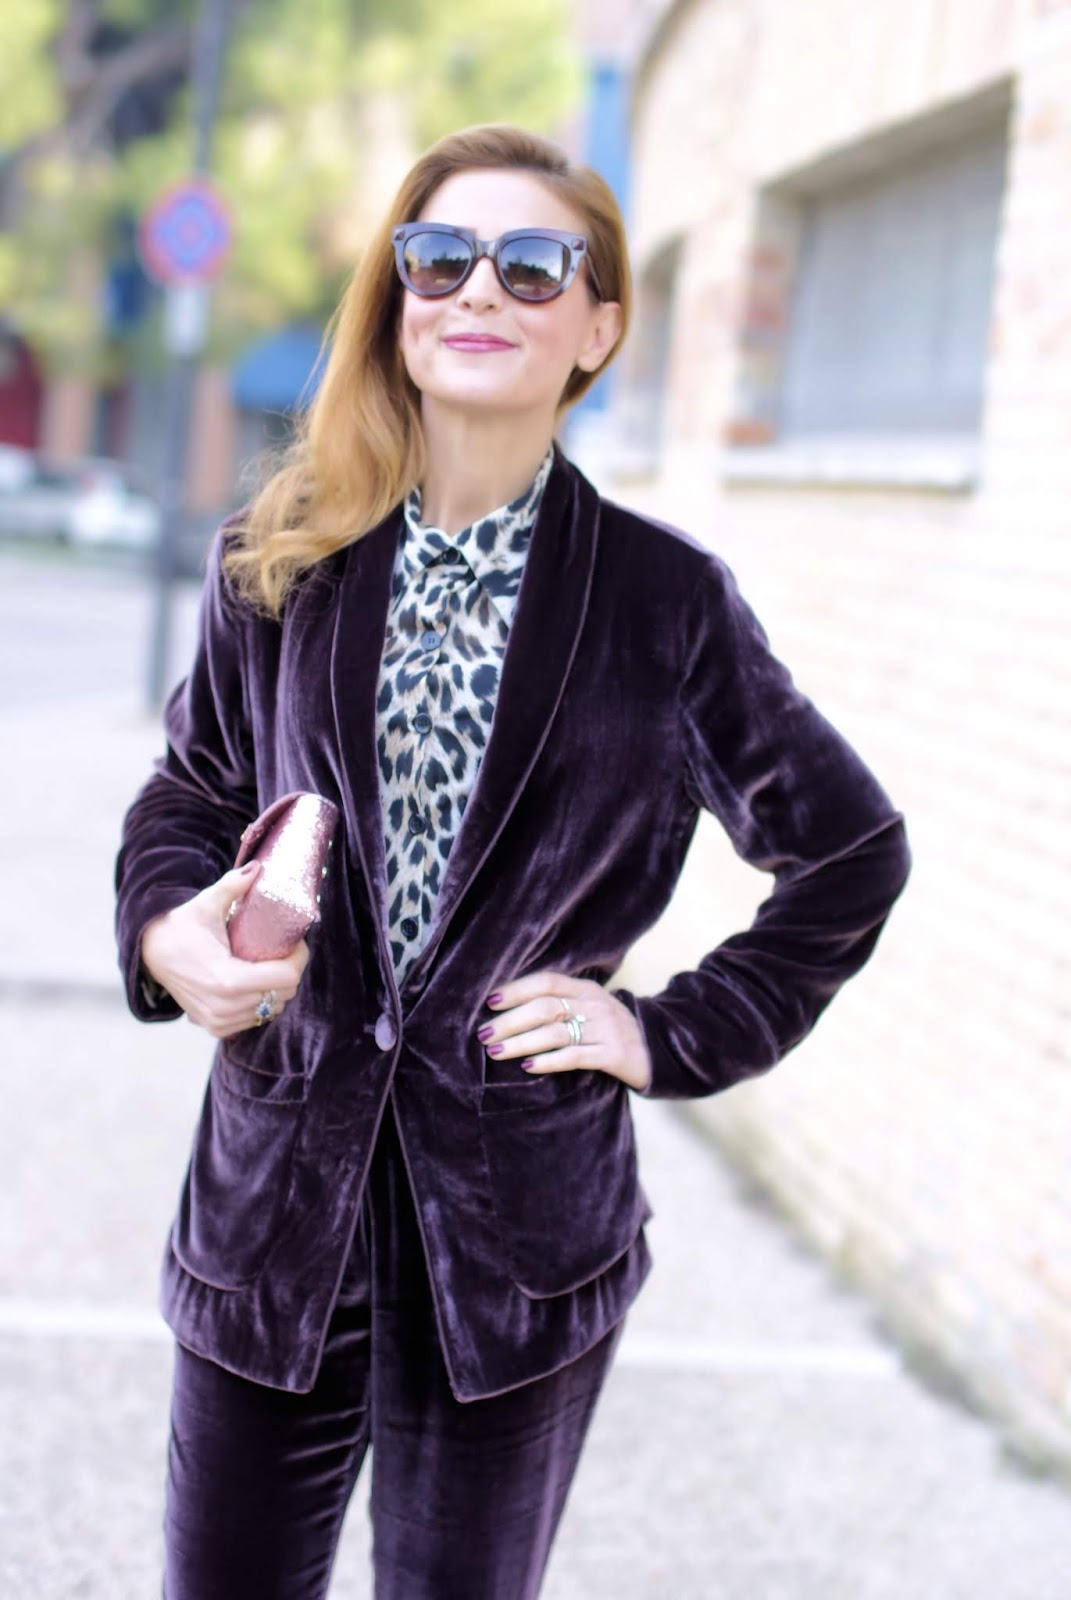 Velvet burgundy suit: a chic outfit idea from 1.2.3 Paris on Fashion and Cookies fashion, fashion blogger style